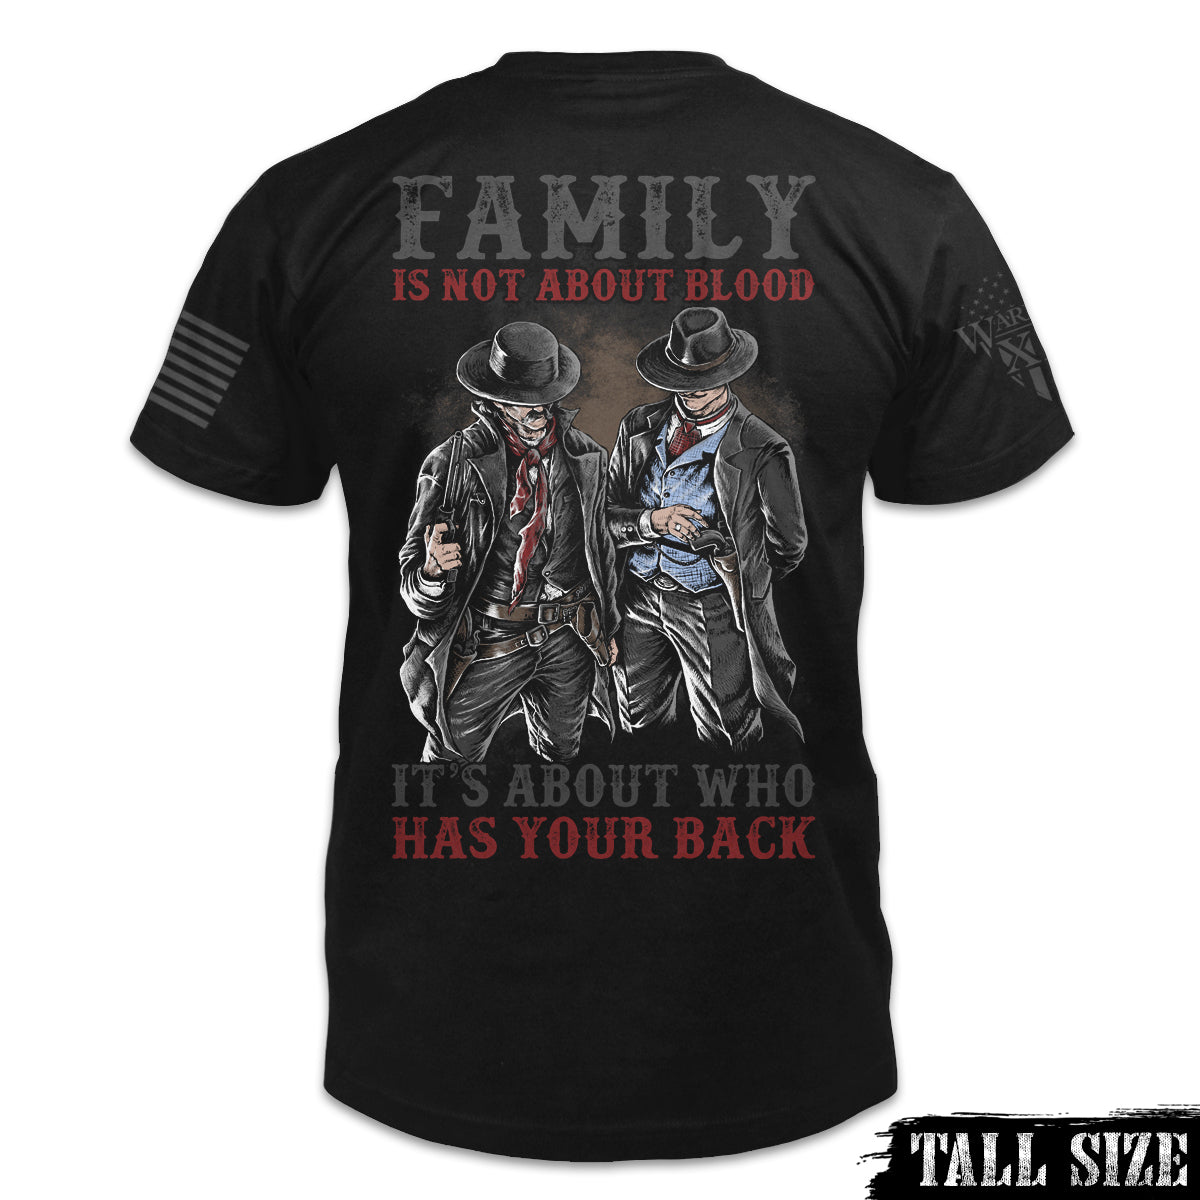 A black tall size shirt with the words "Family is not about blood, it's about who has your back" with a two western cowboys printed on the back of the shirt.